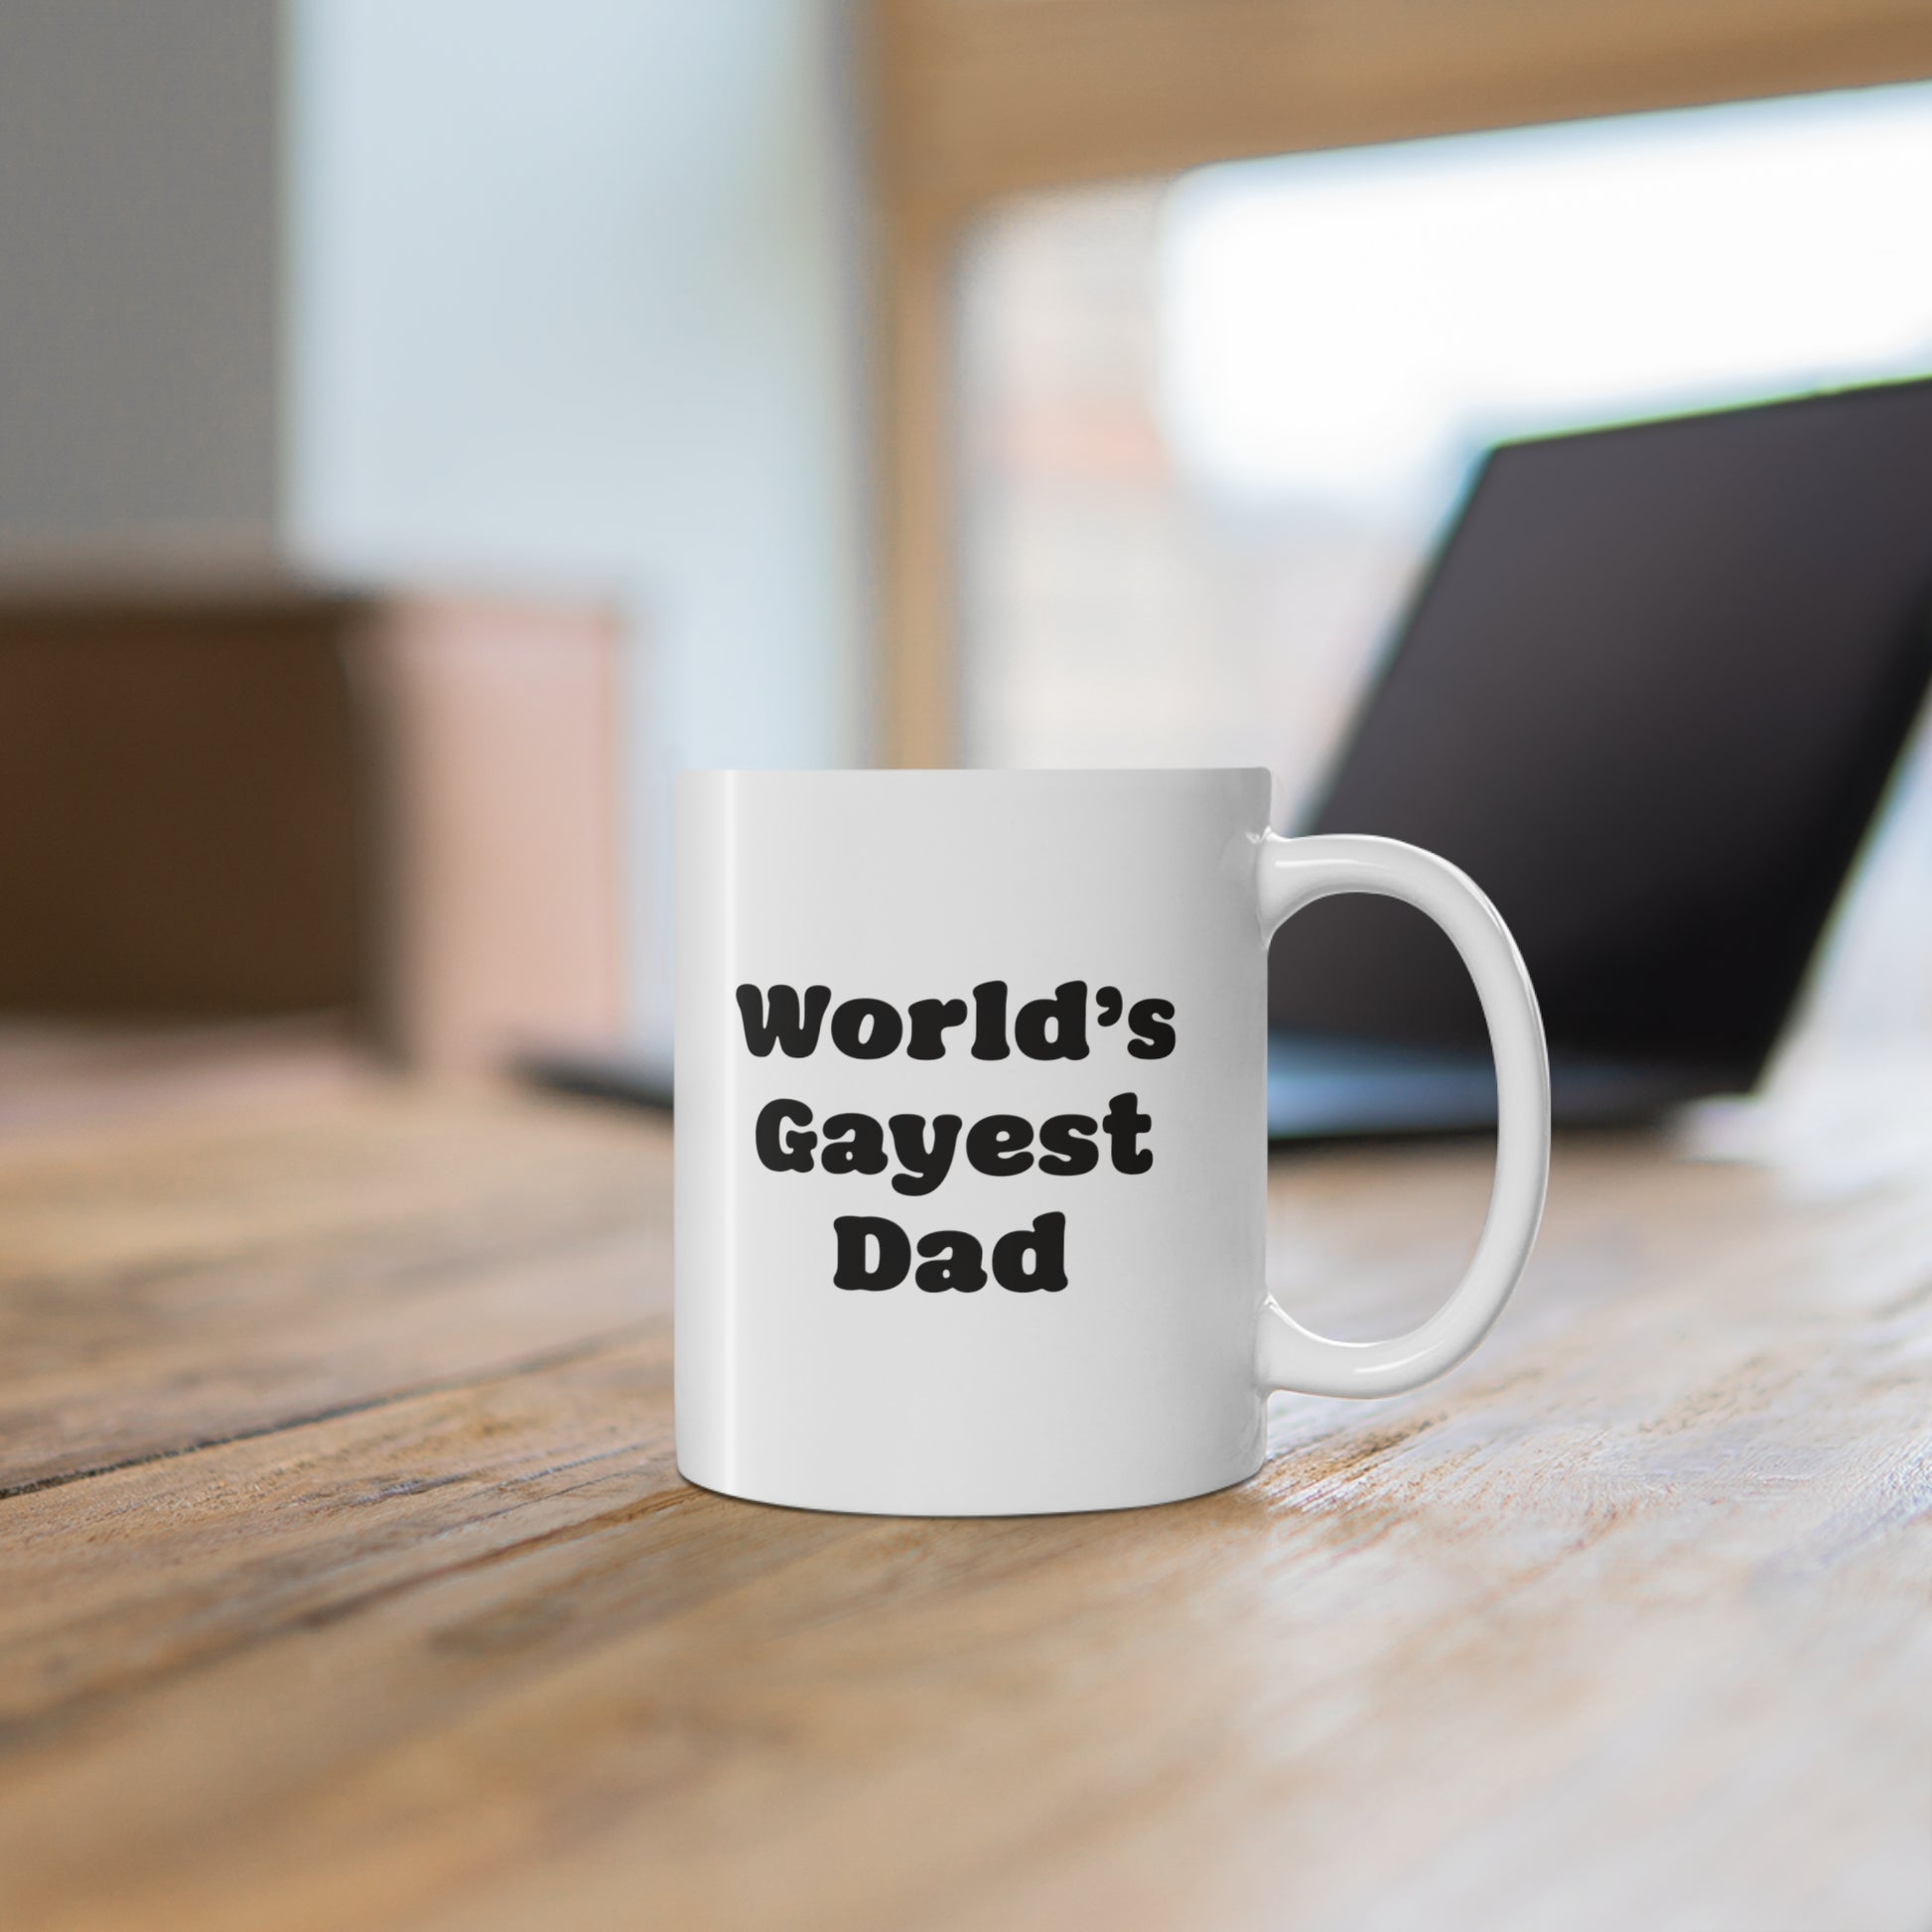 11oz ceramic mug with quote World's Gayest Dad